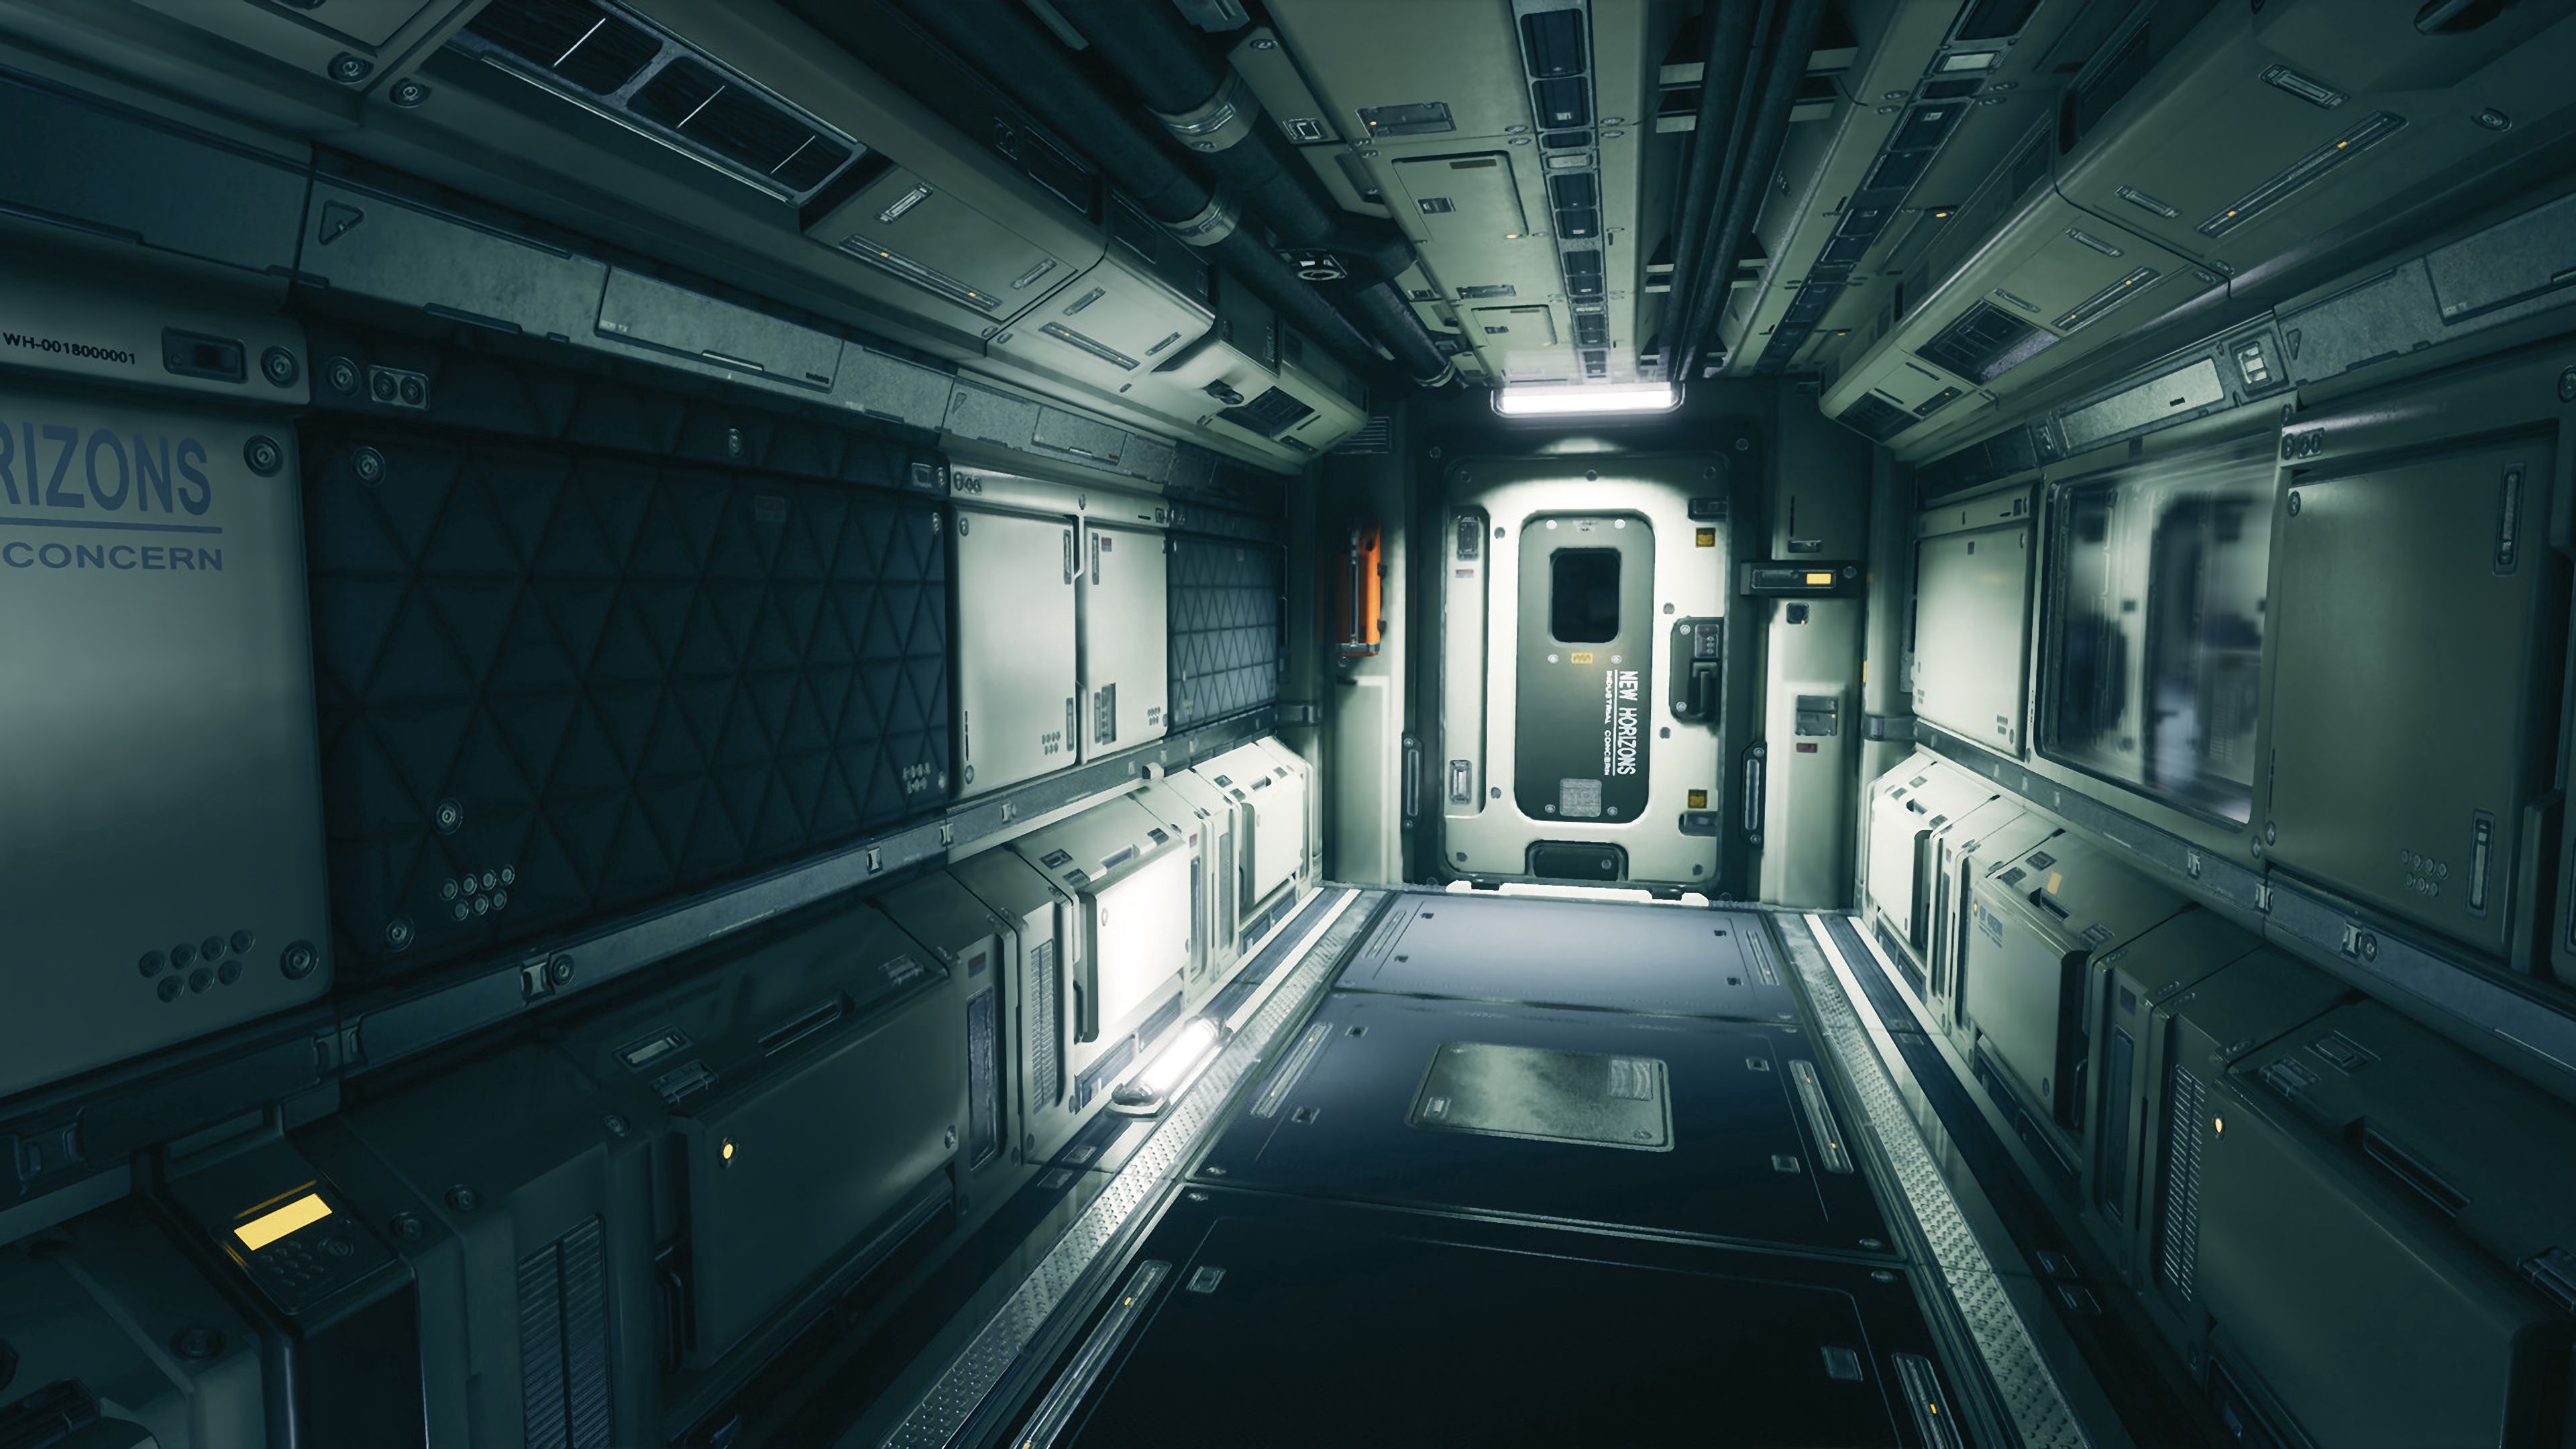 space station, miscellanea, miscellaneous, door Full HD